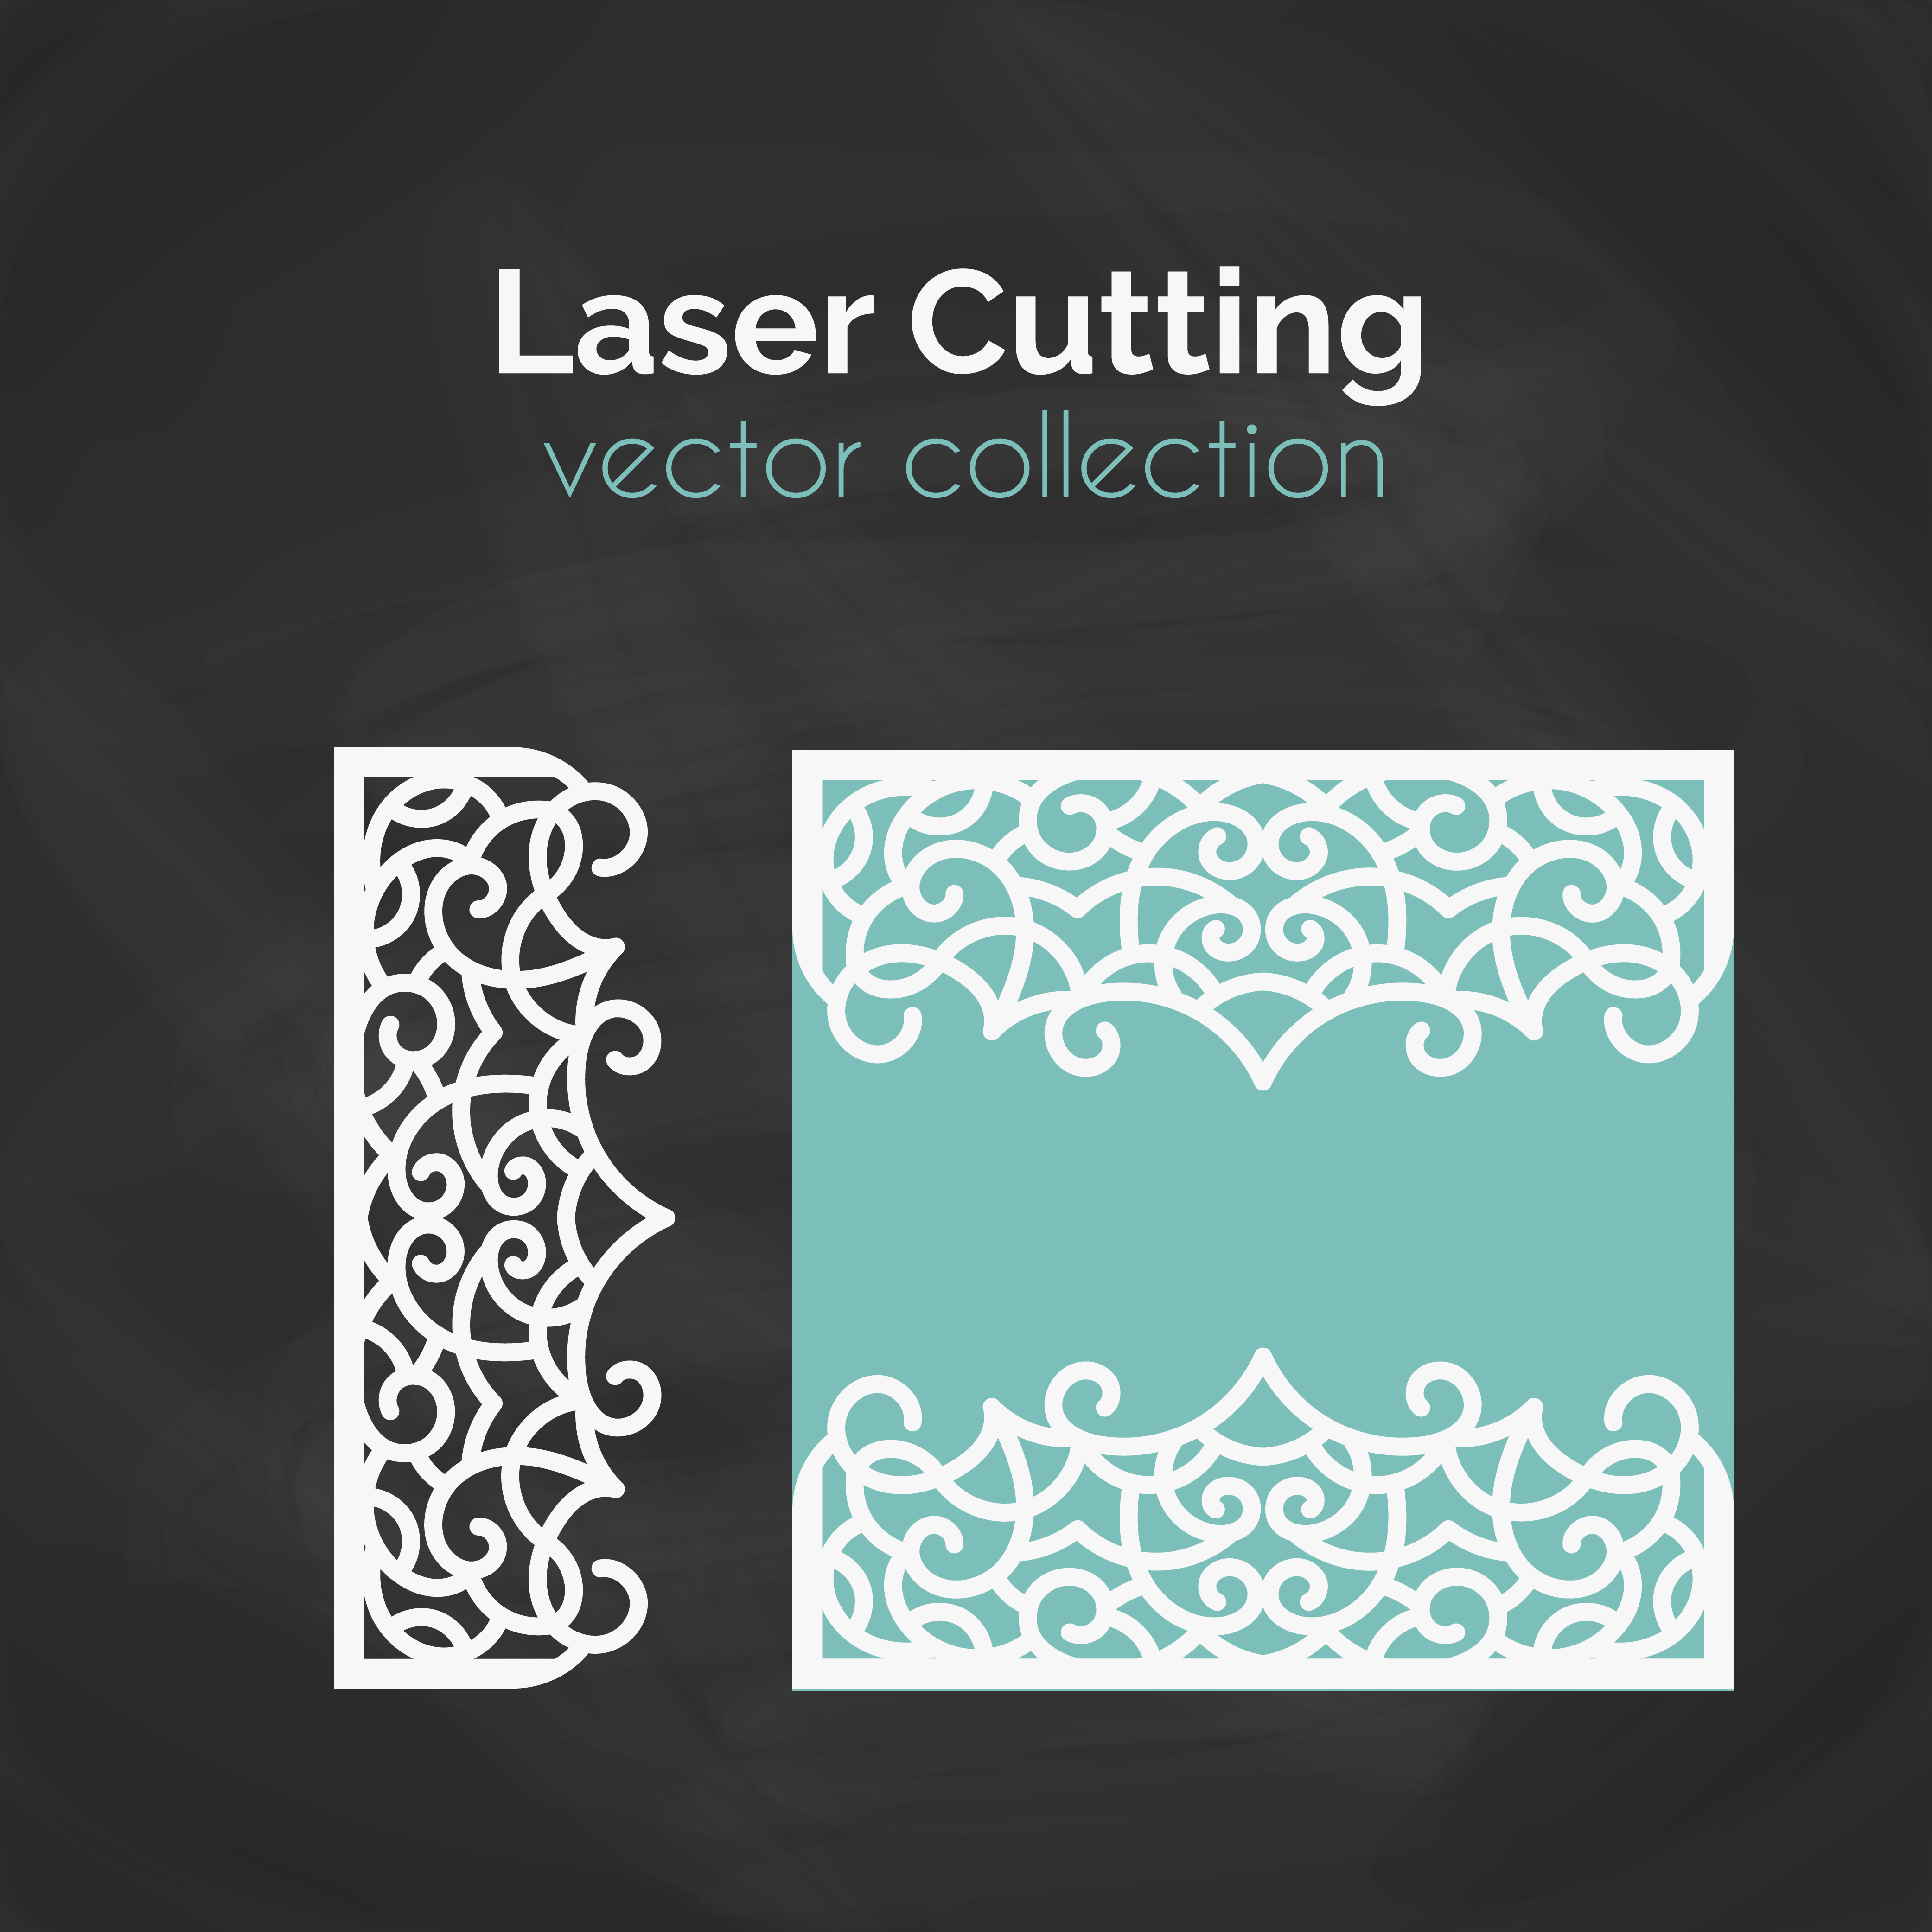  Laser  Cut  Card Template  For Cutting  Cutout Illustration 